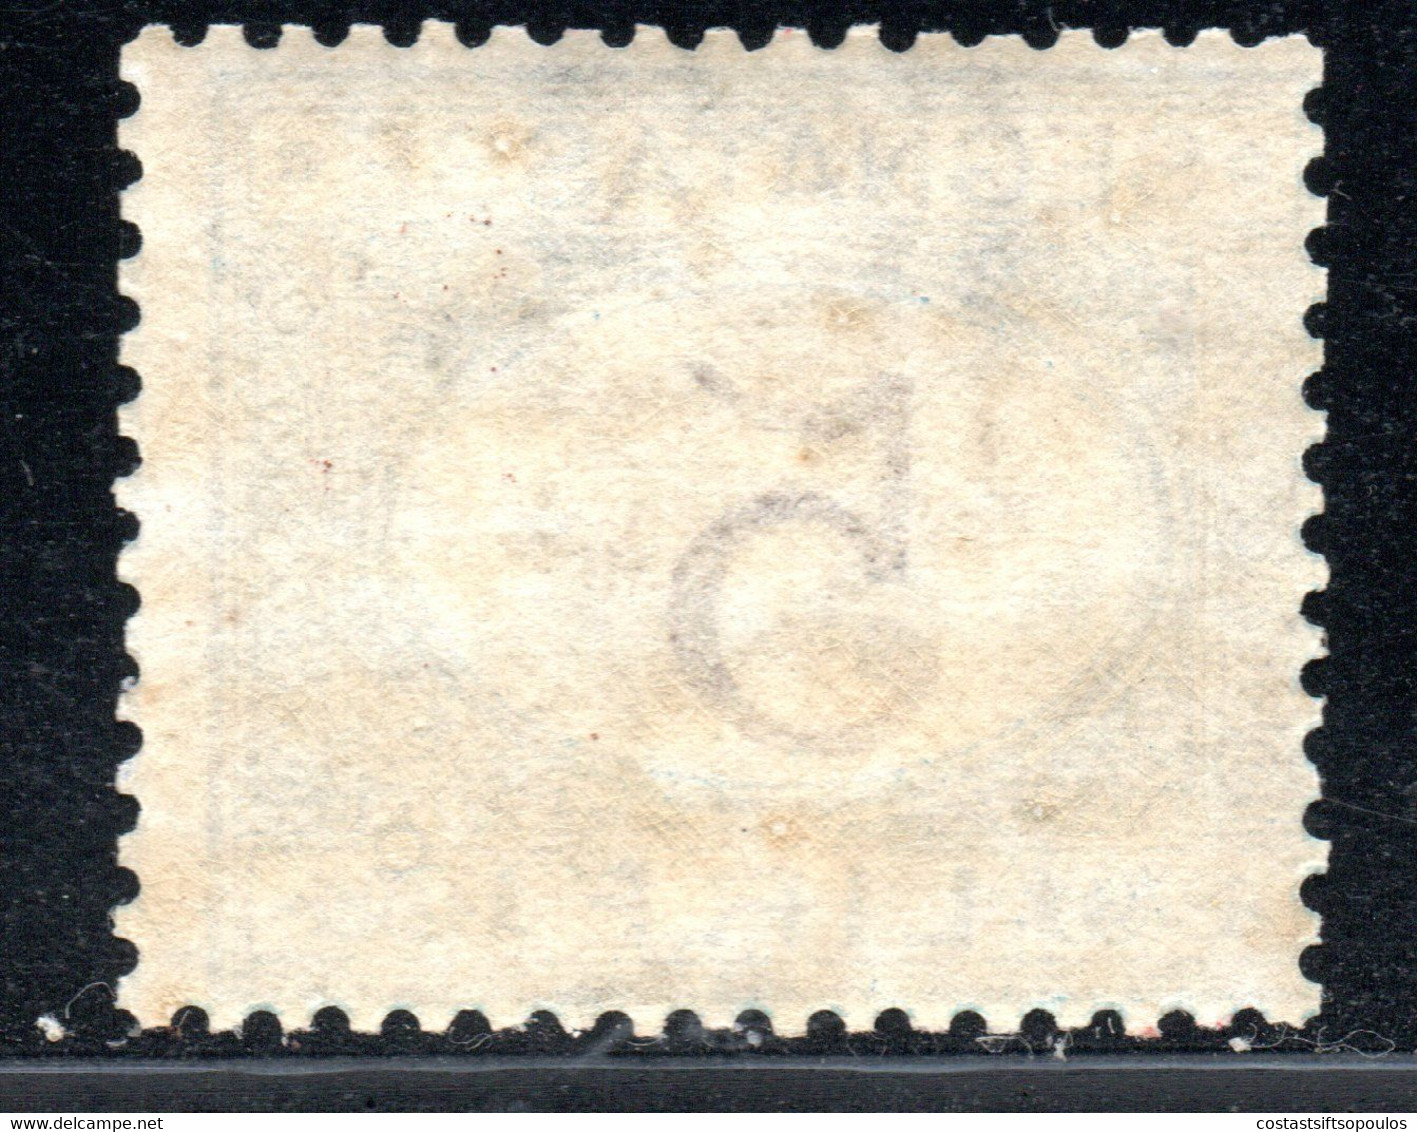 833.ITALY.1874 5 L. POSTAGE DUE,MNH POSSIBLY REGUMMED - Postage Due